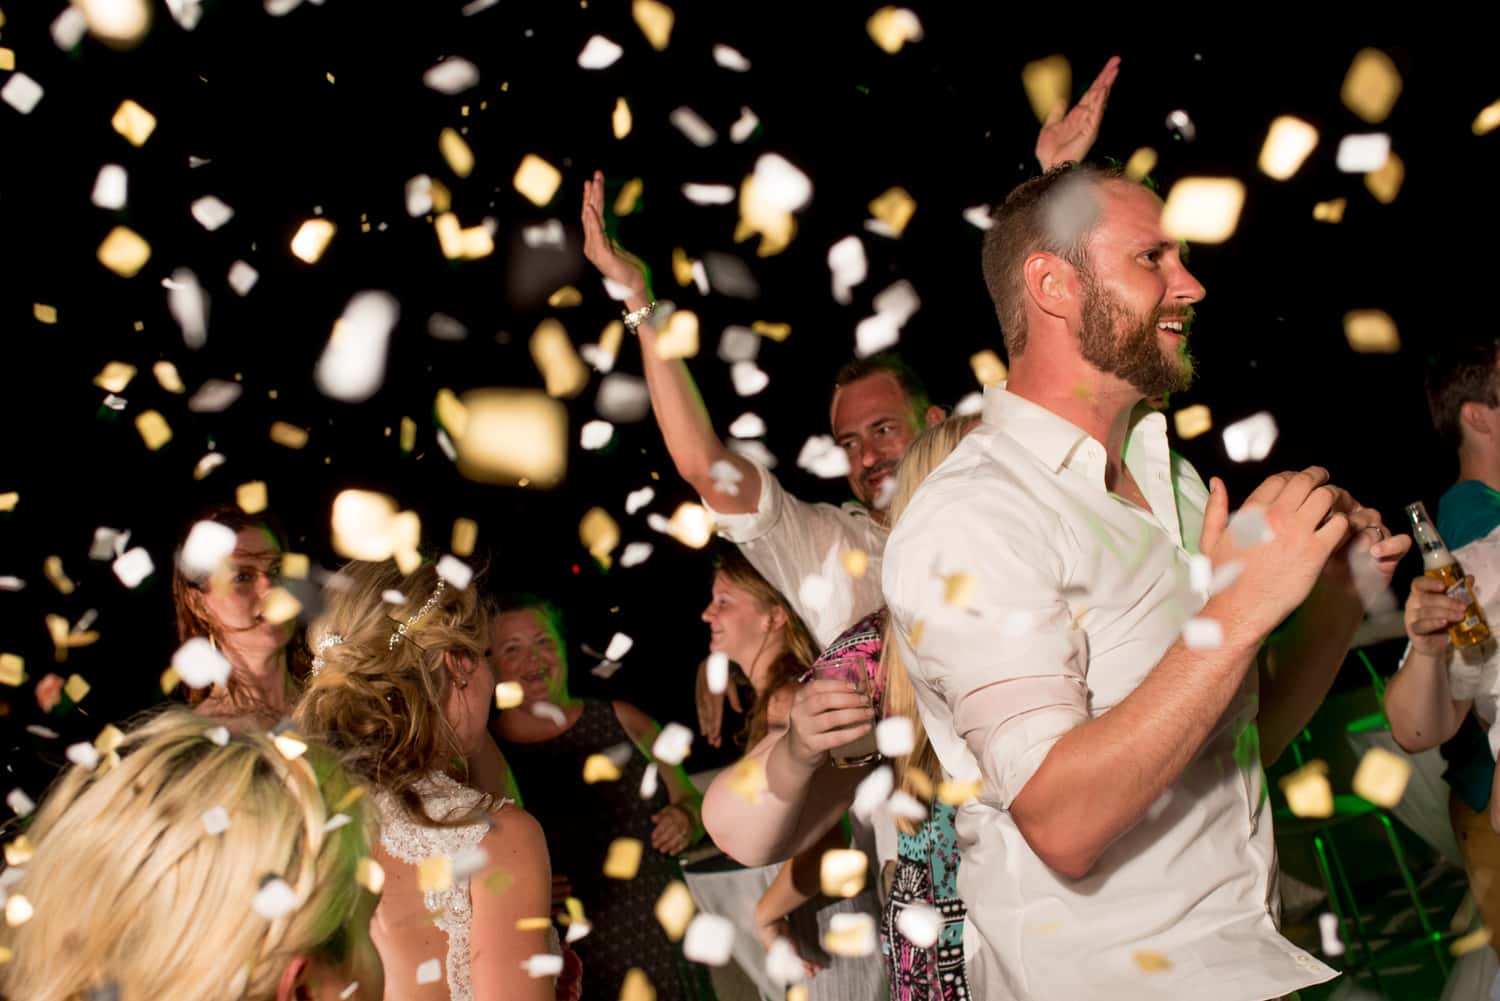 Wedding reception with white and yellow confetti